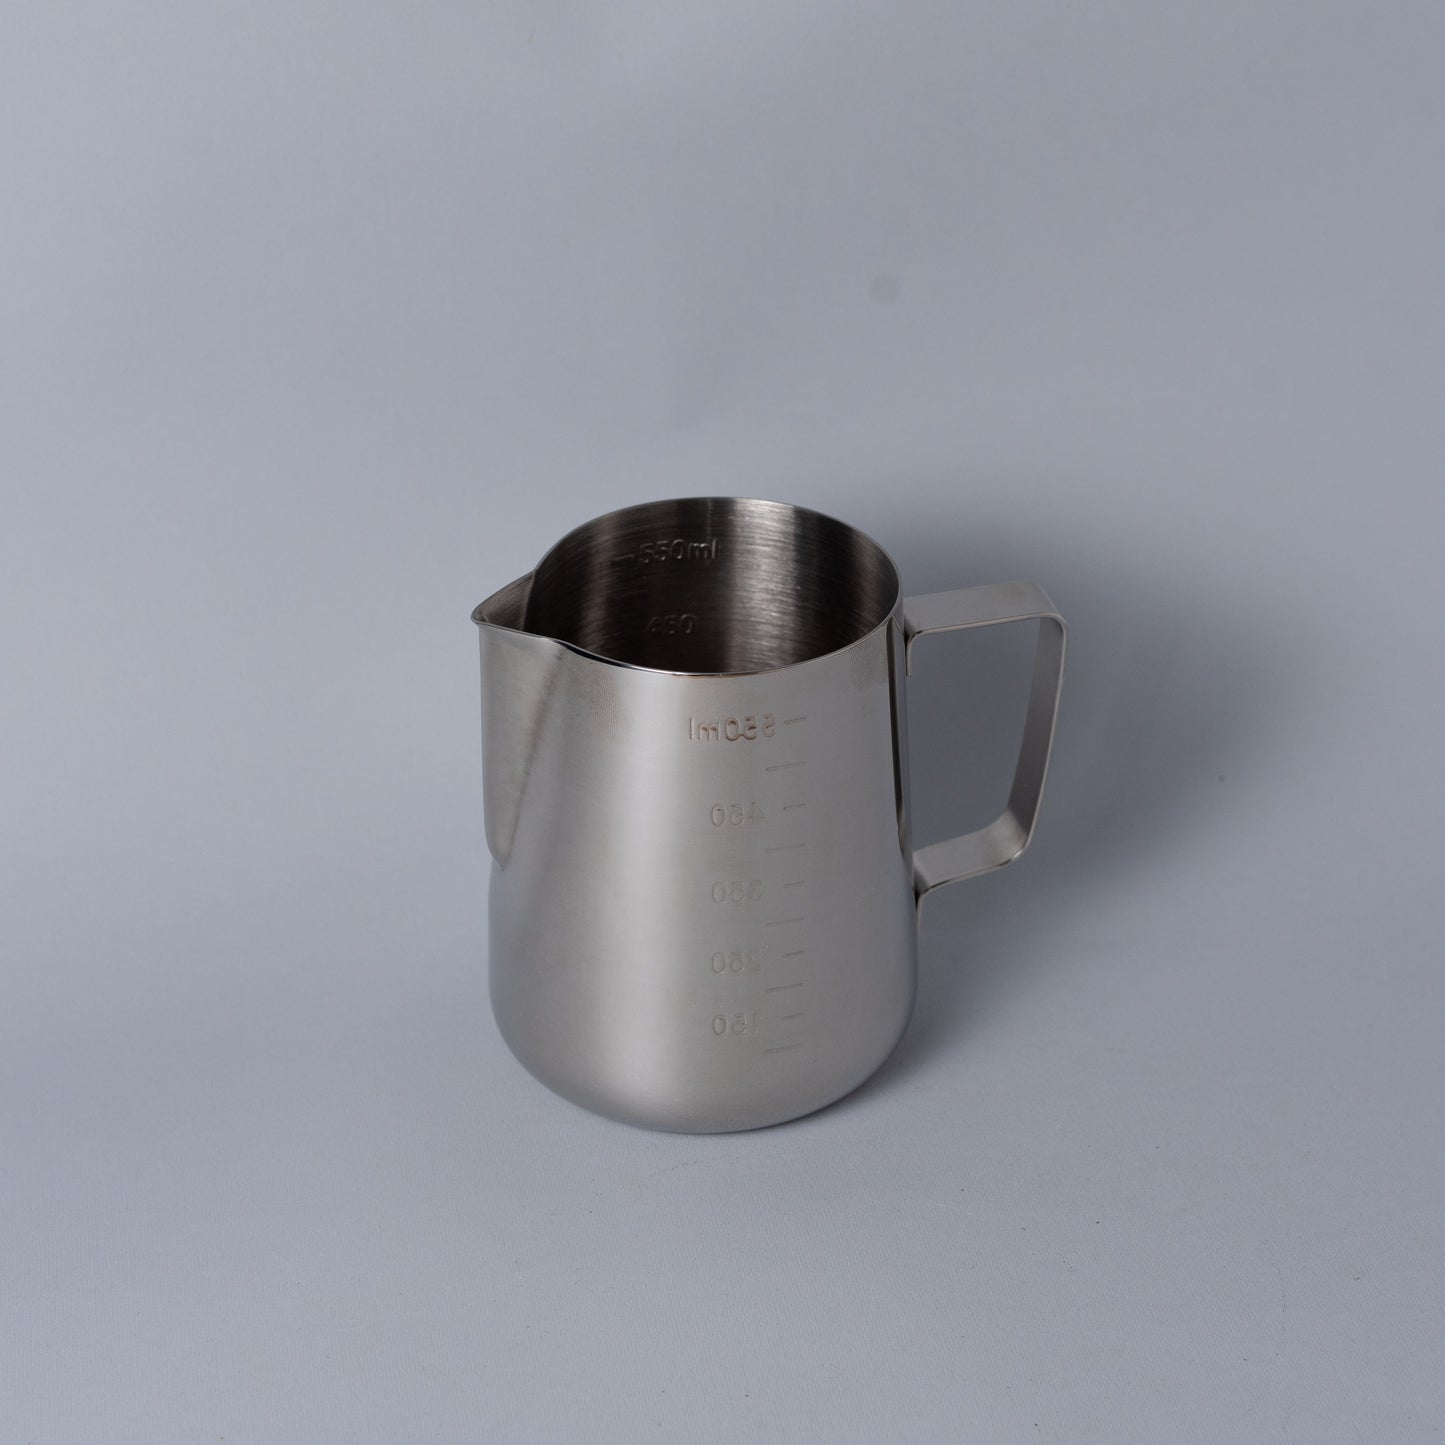 Stainless Steel Milk Frothing Pitcher - 550 ml